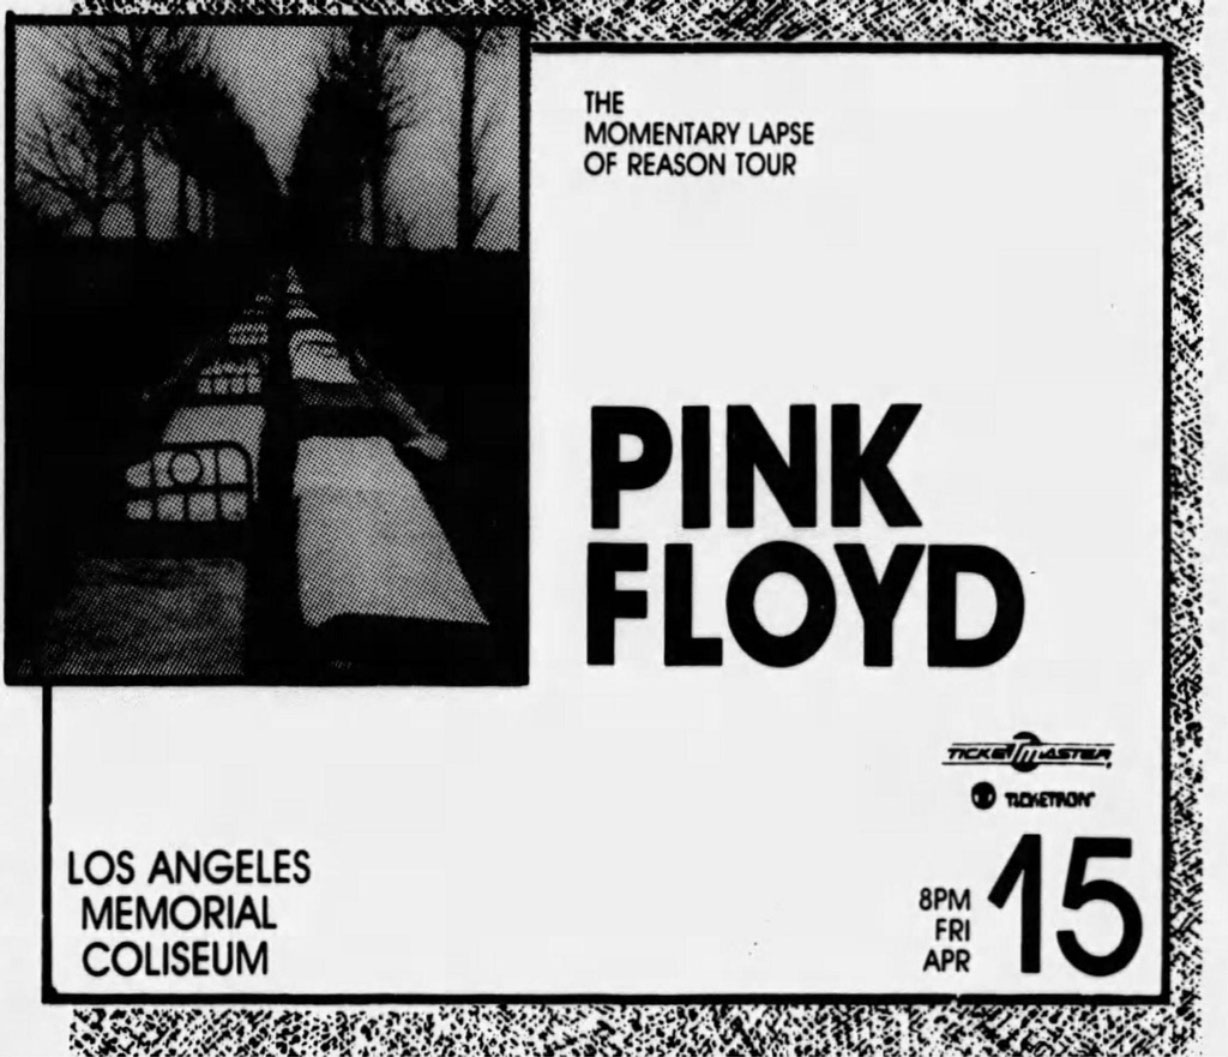 Pink Floyd ‘A Momentary Lapse of Reason’ Tour